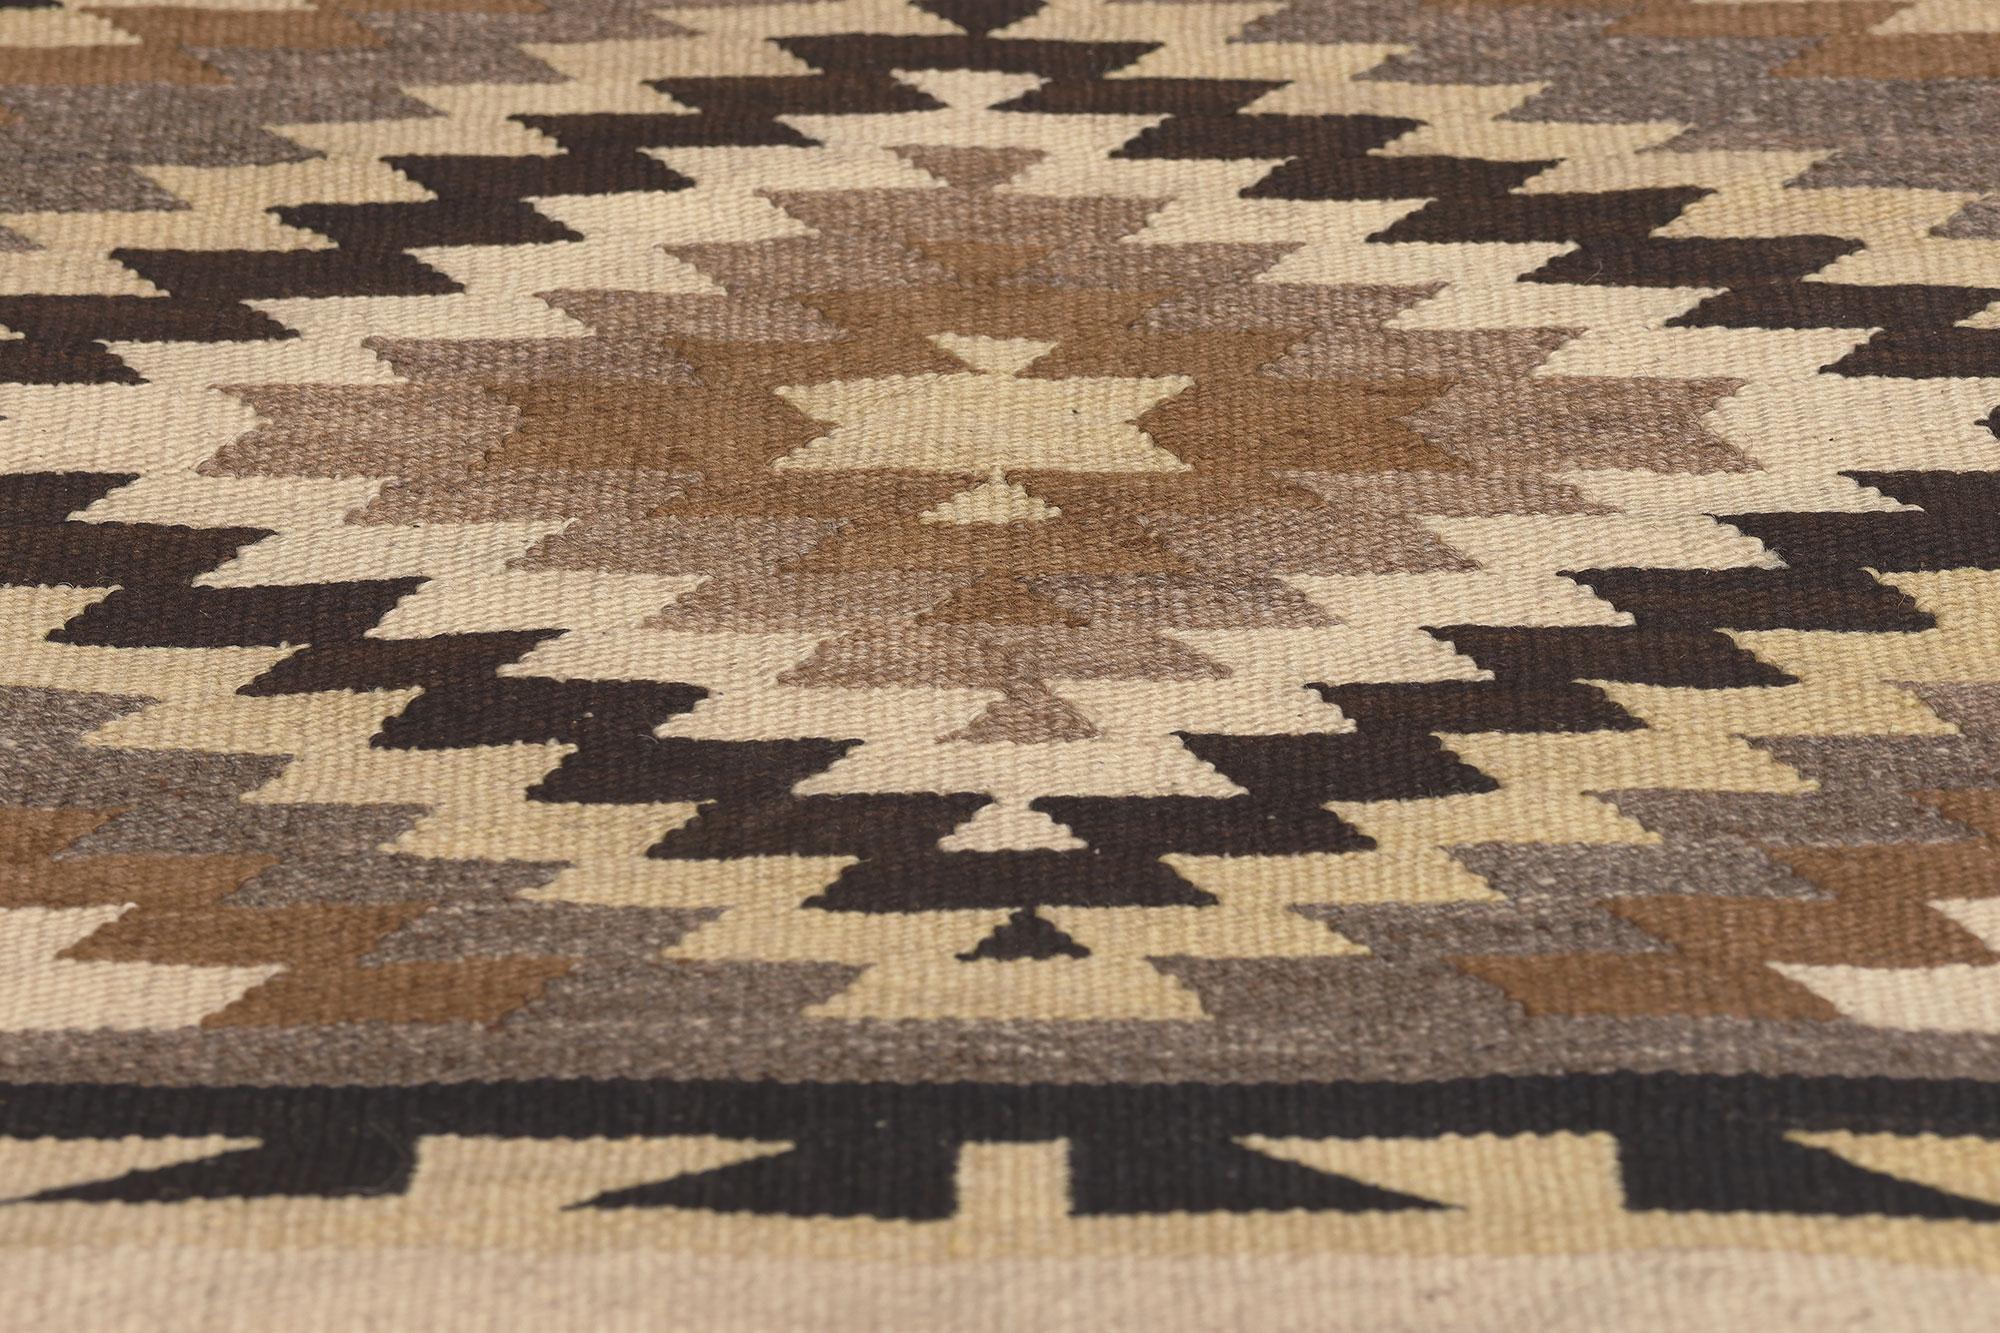 Vintage Two Grey Hills Navajo Rug, Subtle Southwest Meets Organic Modern In Good Condition For Sale In Dallas, TX